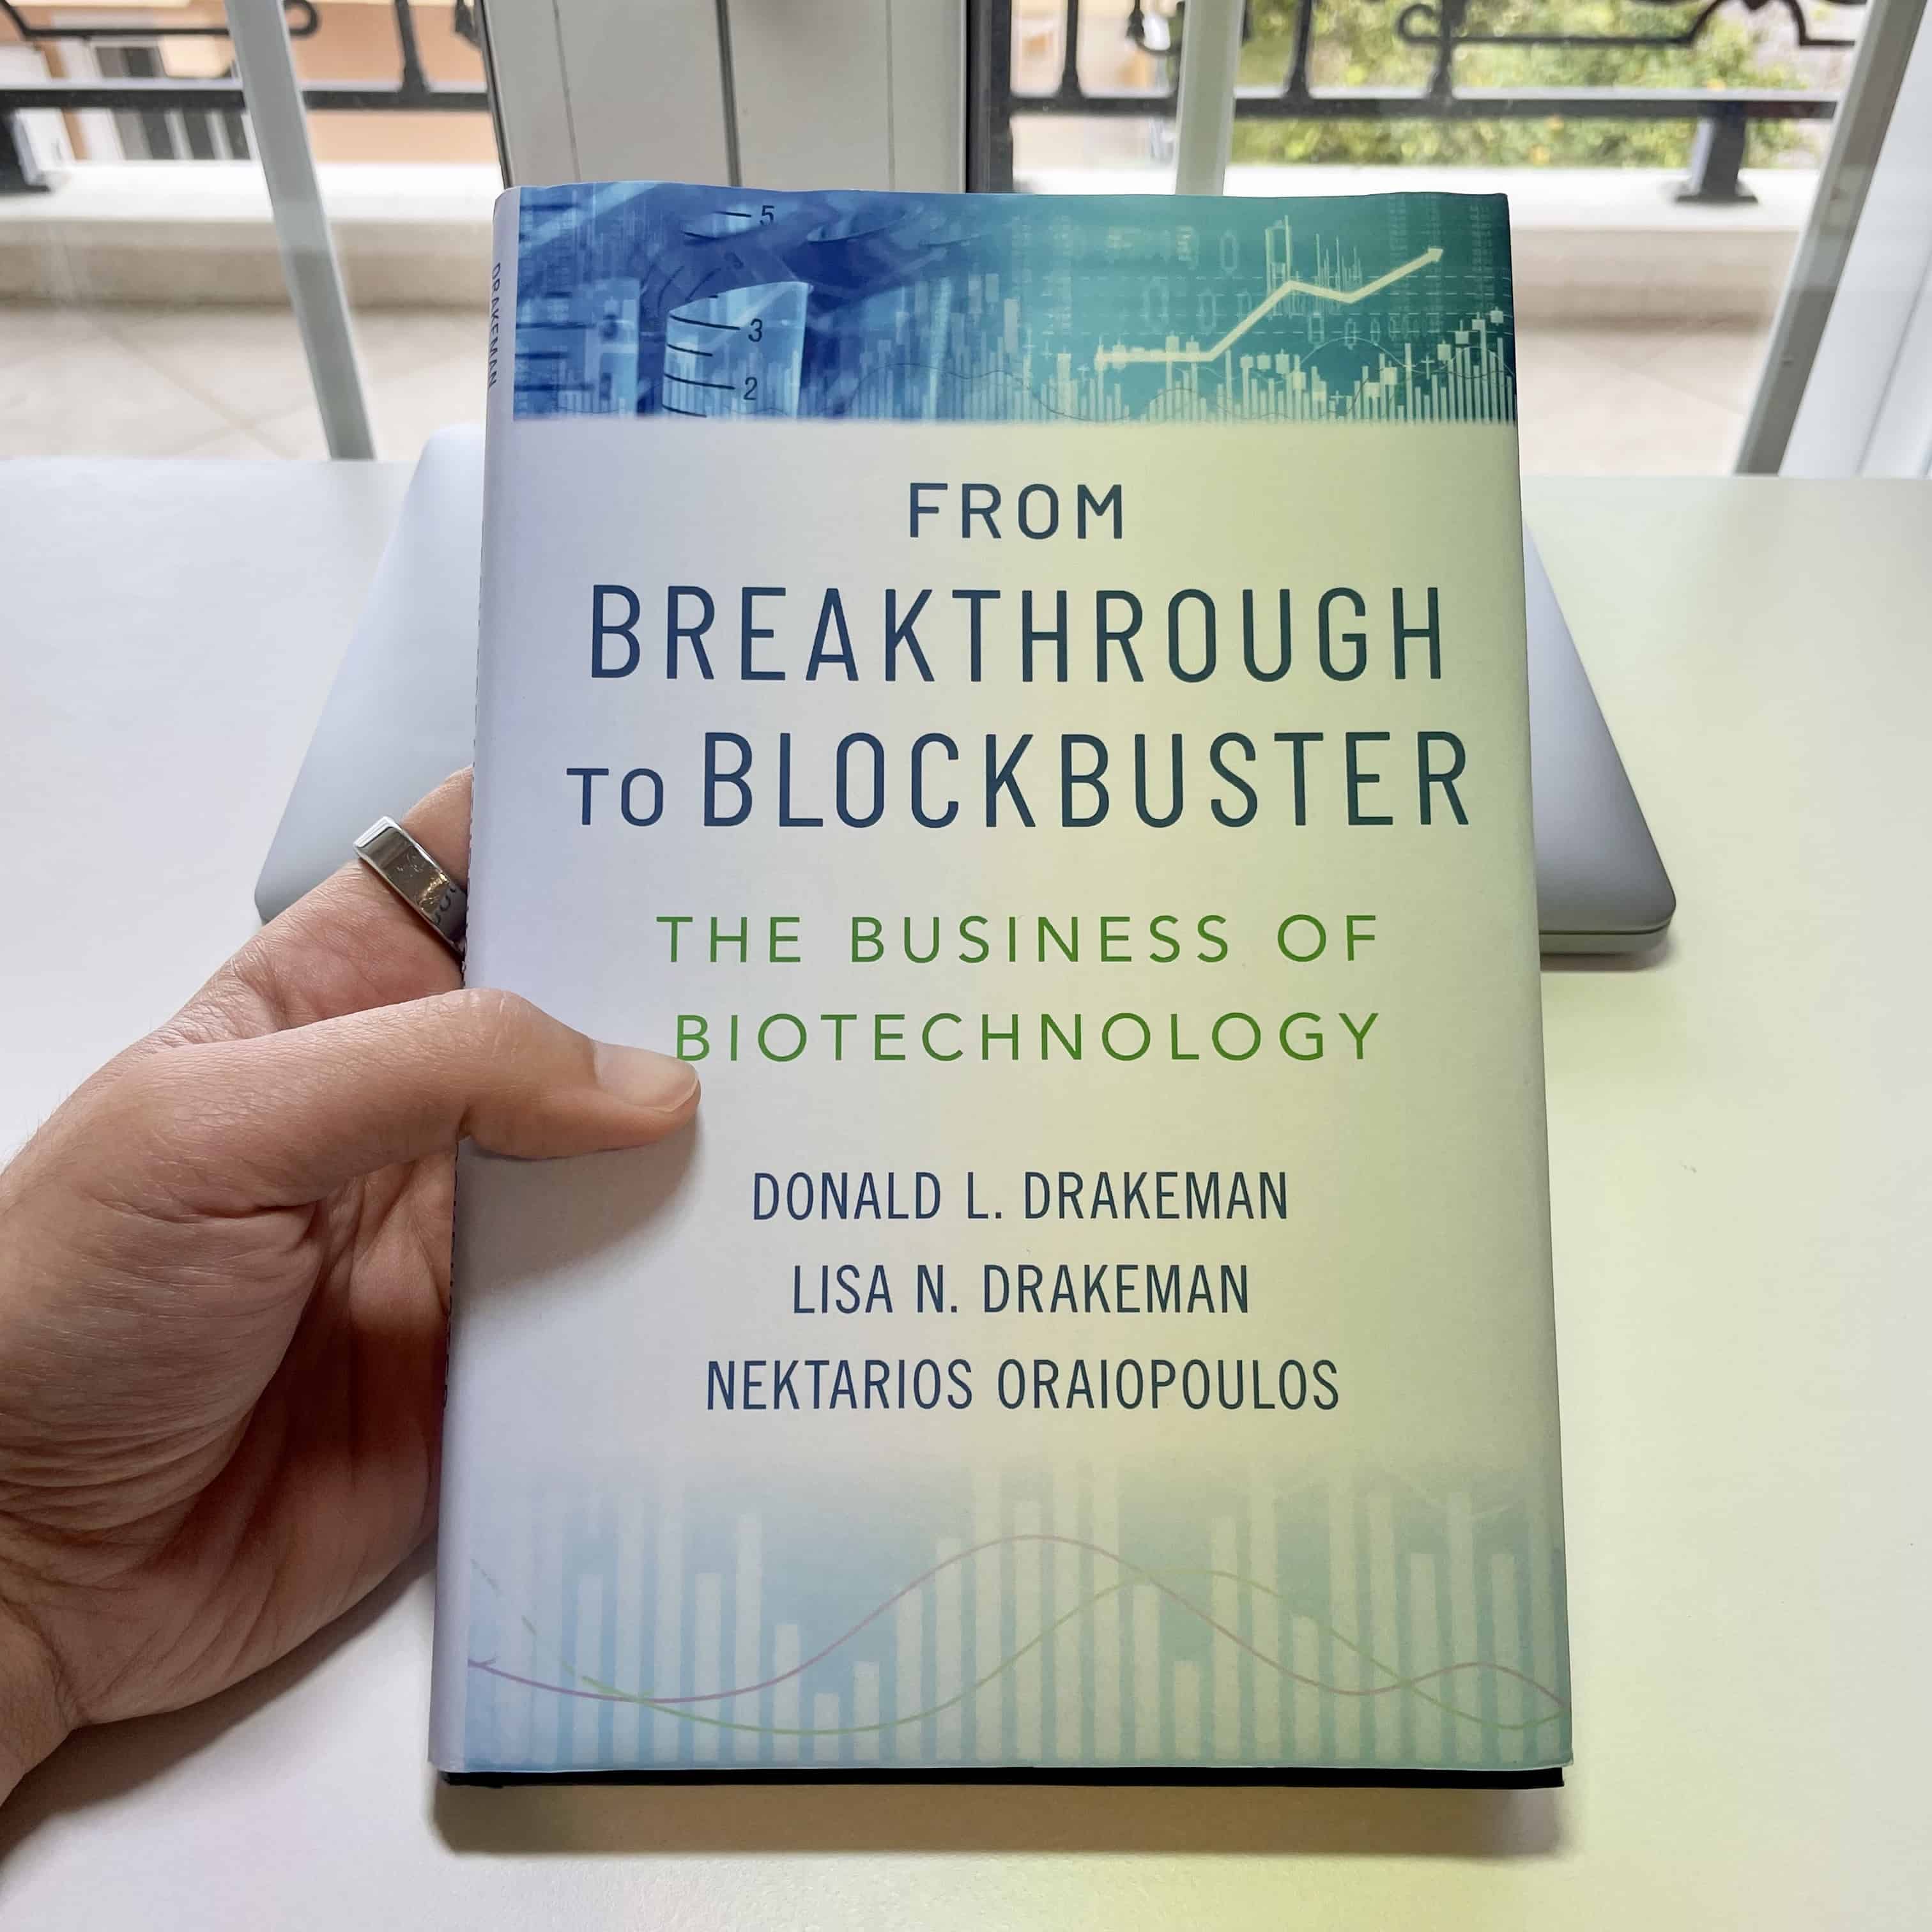 Takeaways from the Book “From Breakthrough to Blockbuster”